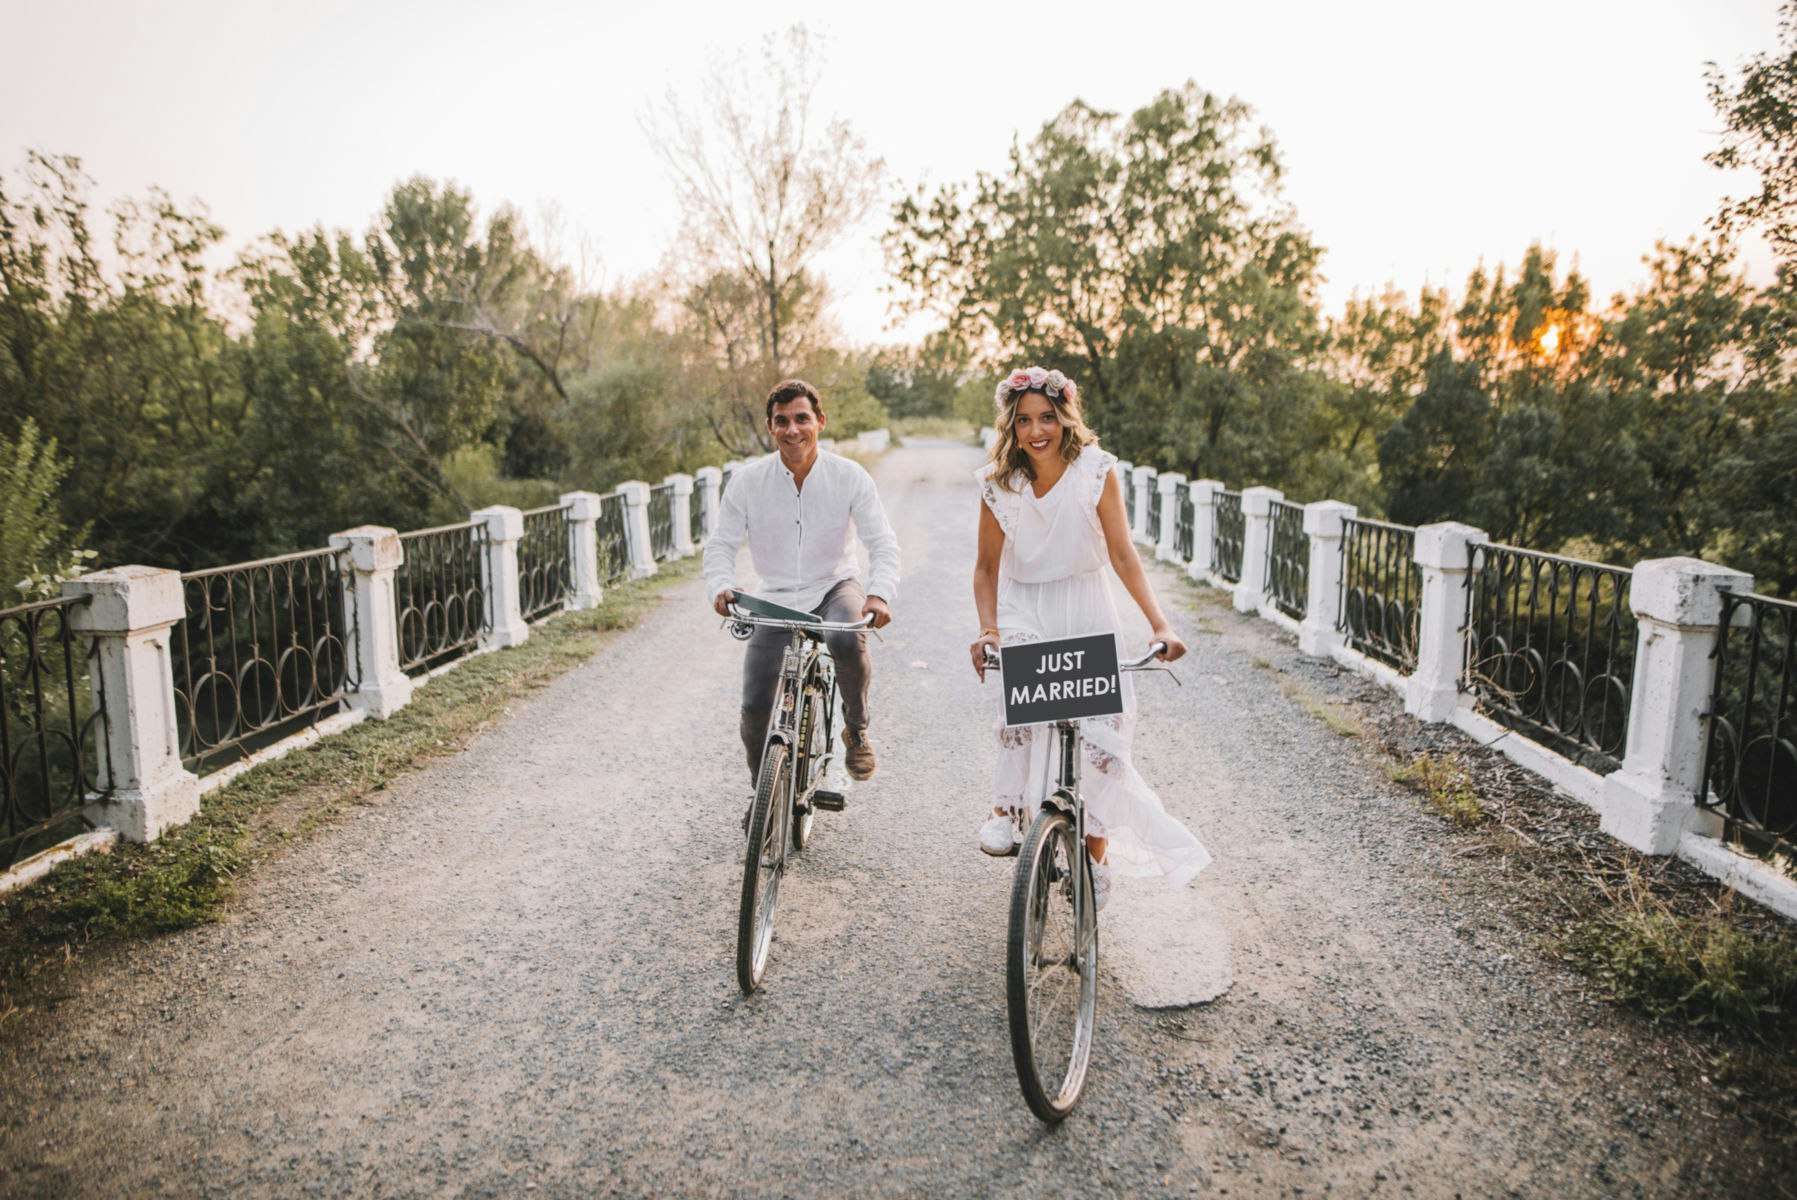 A bride and grooom on bicycles